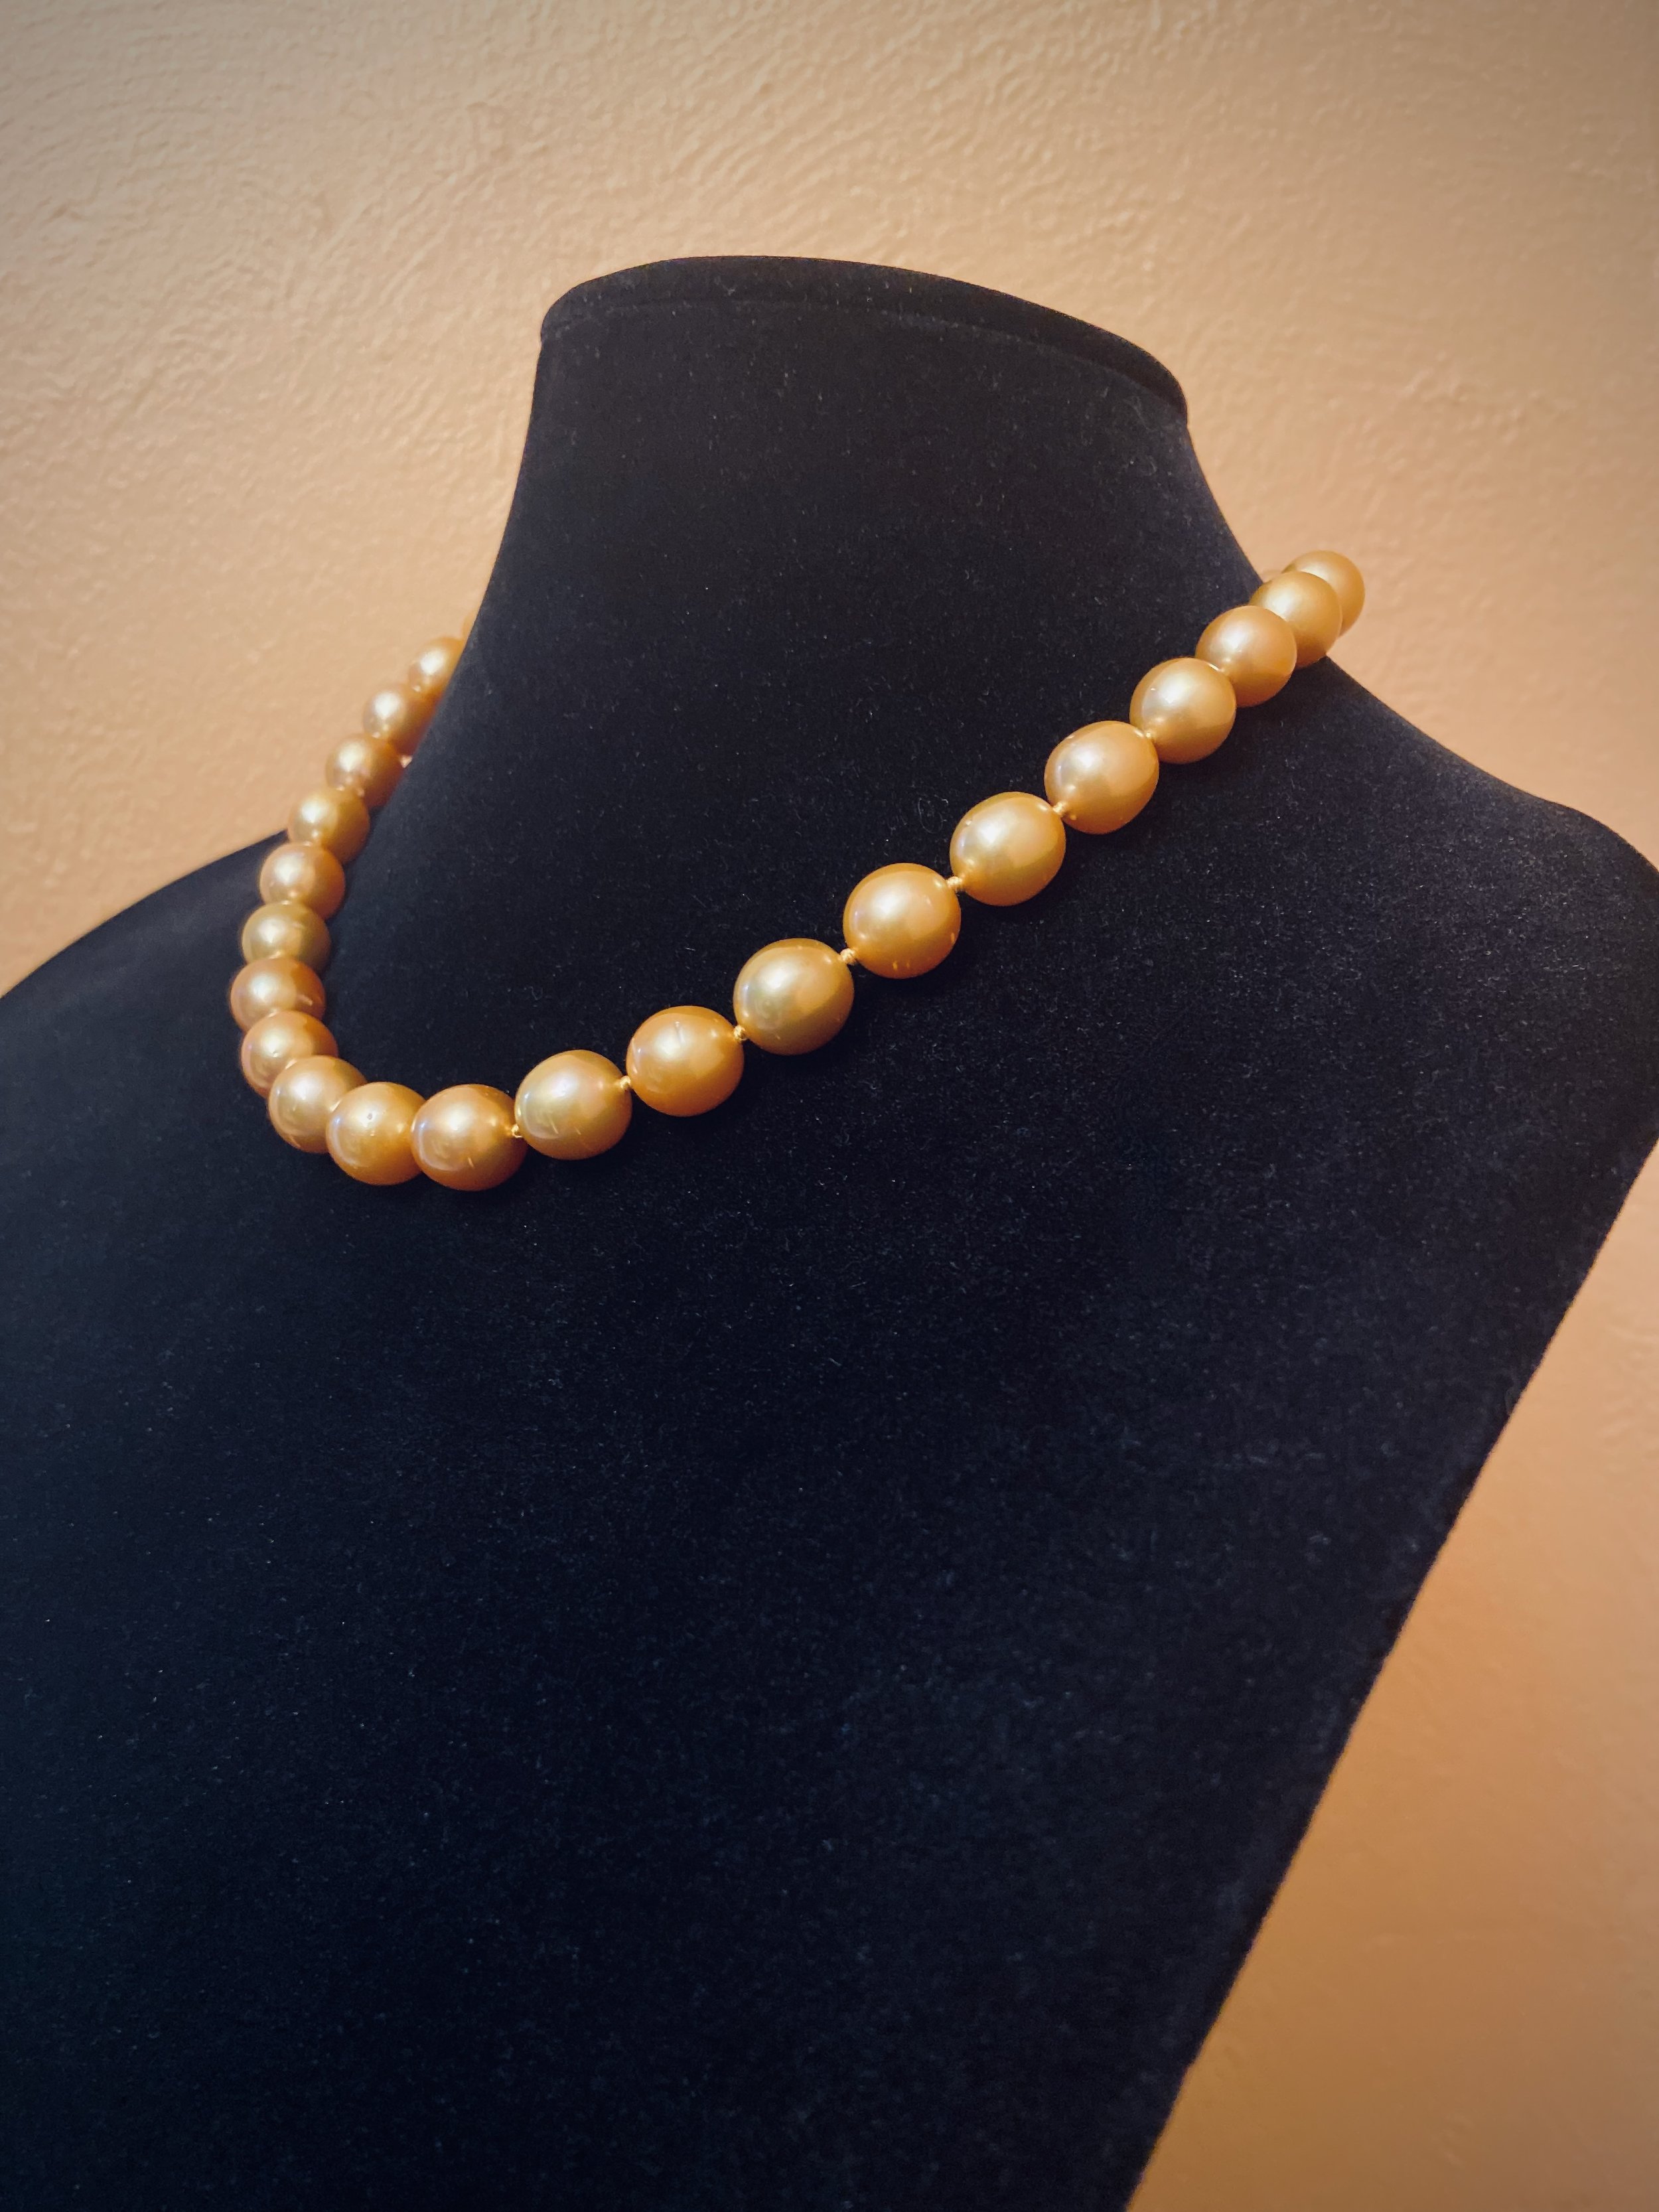 Golden South Sea pearls, courtesy of Gemz Fine Jewelry